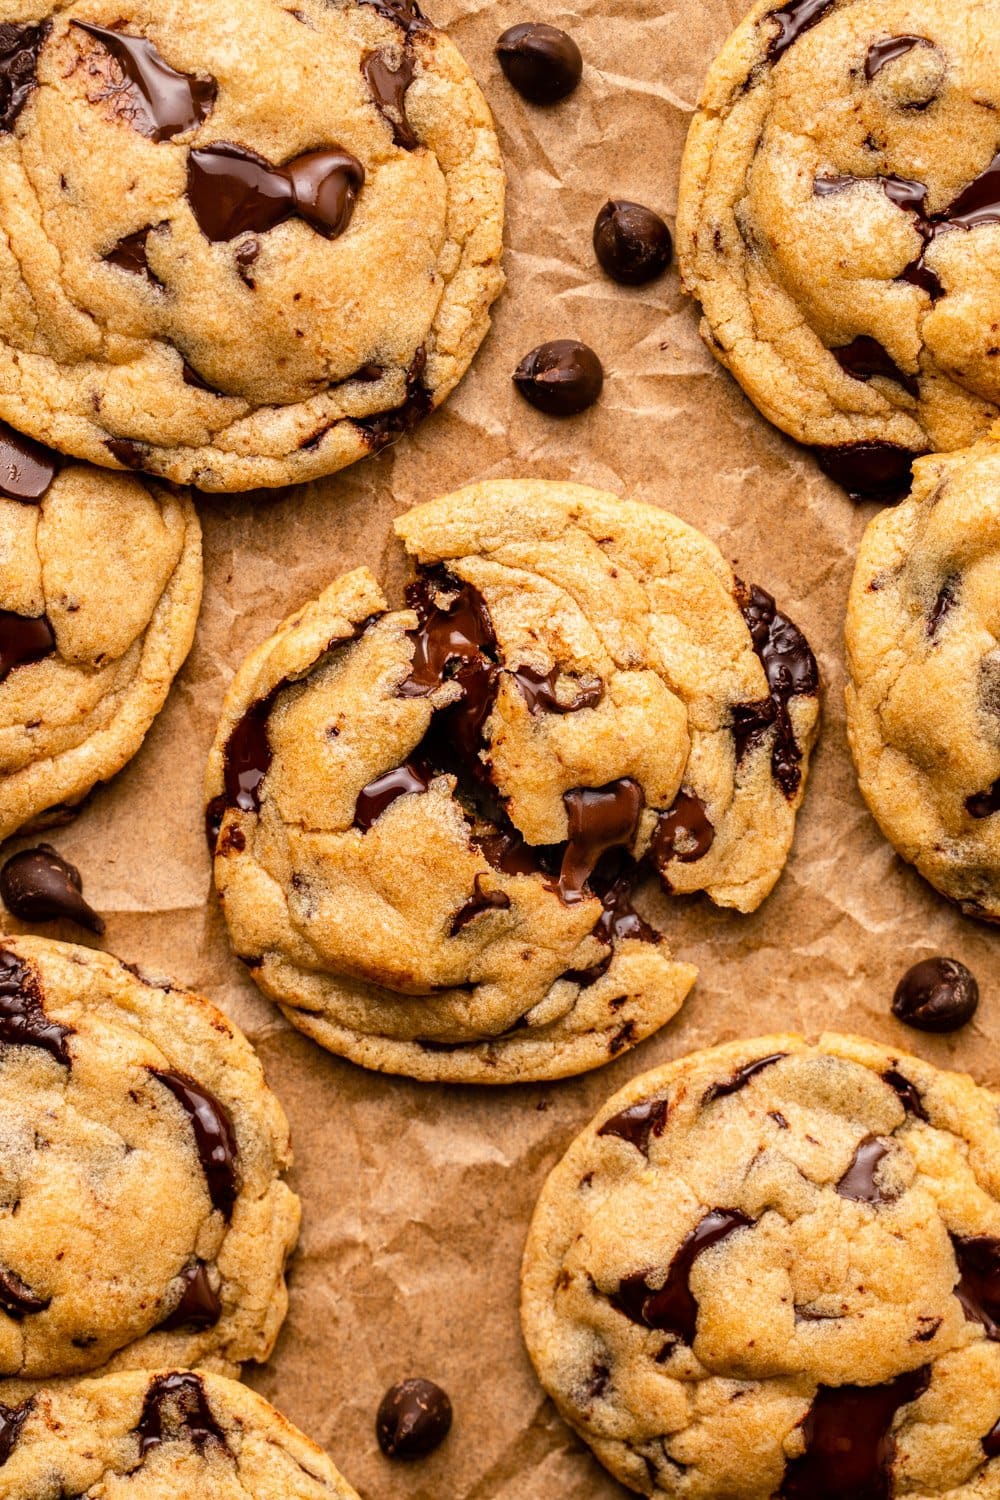 seven chocolate chip cookies laid out on parchment paper with the cookie in the middle divided into two to showcase the melting chocolate